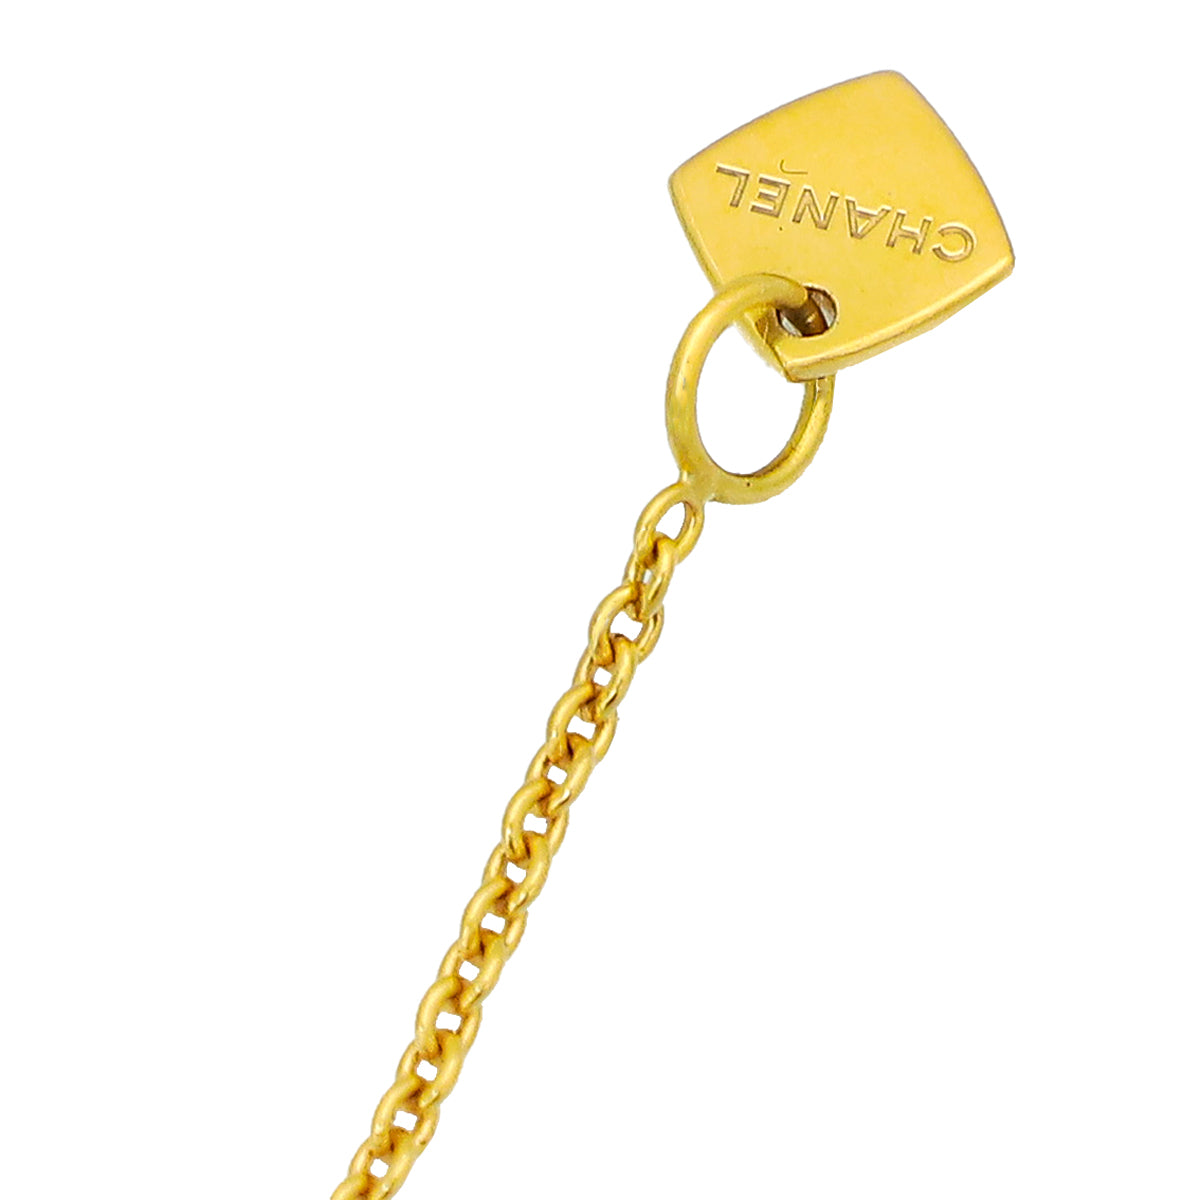 Chanel 18K Yellow Gold Coco Crush Pendant Necklace